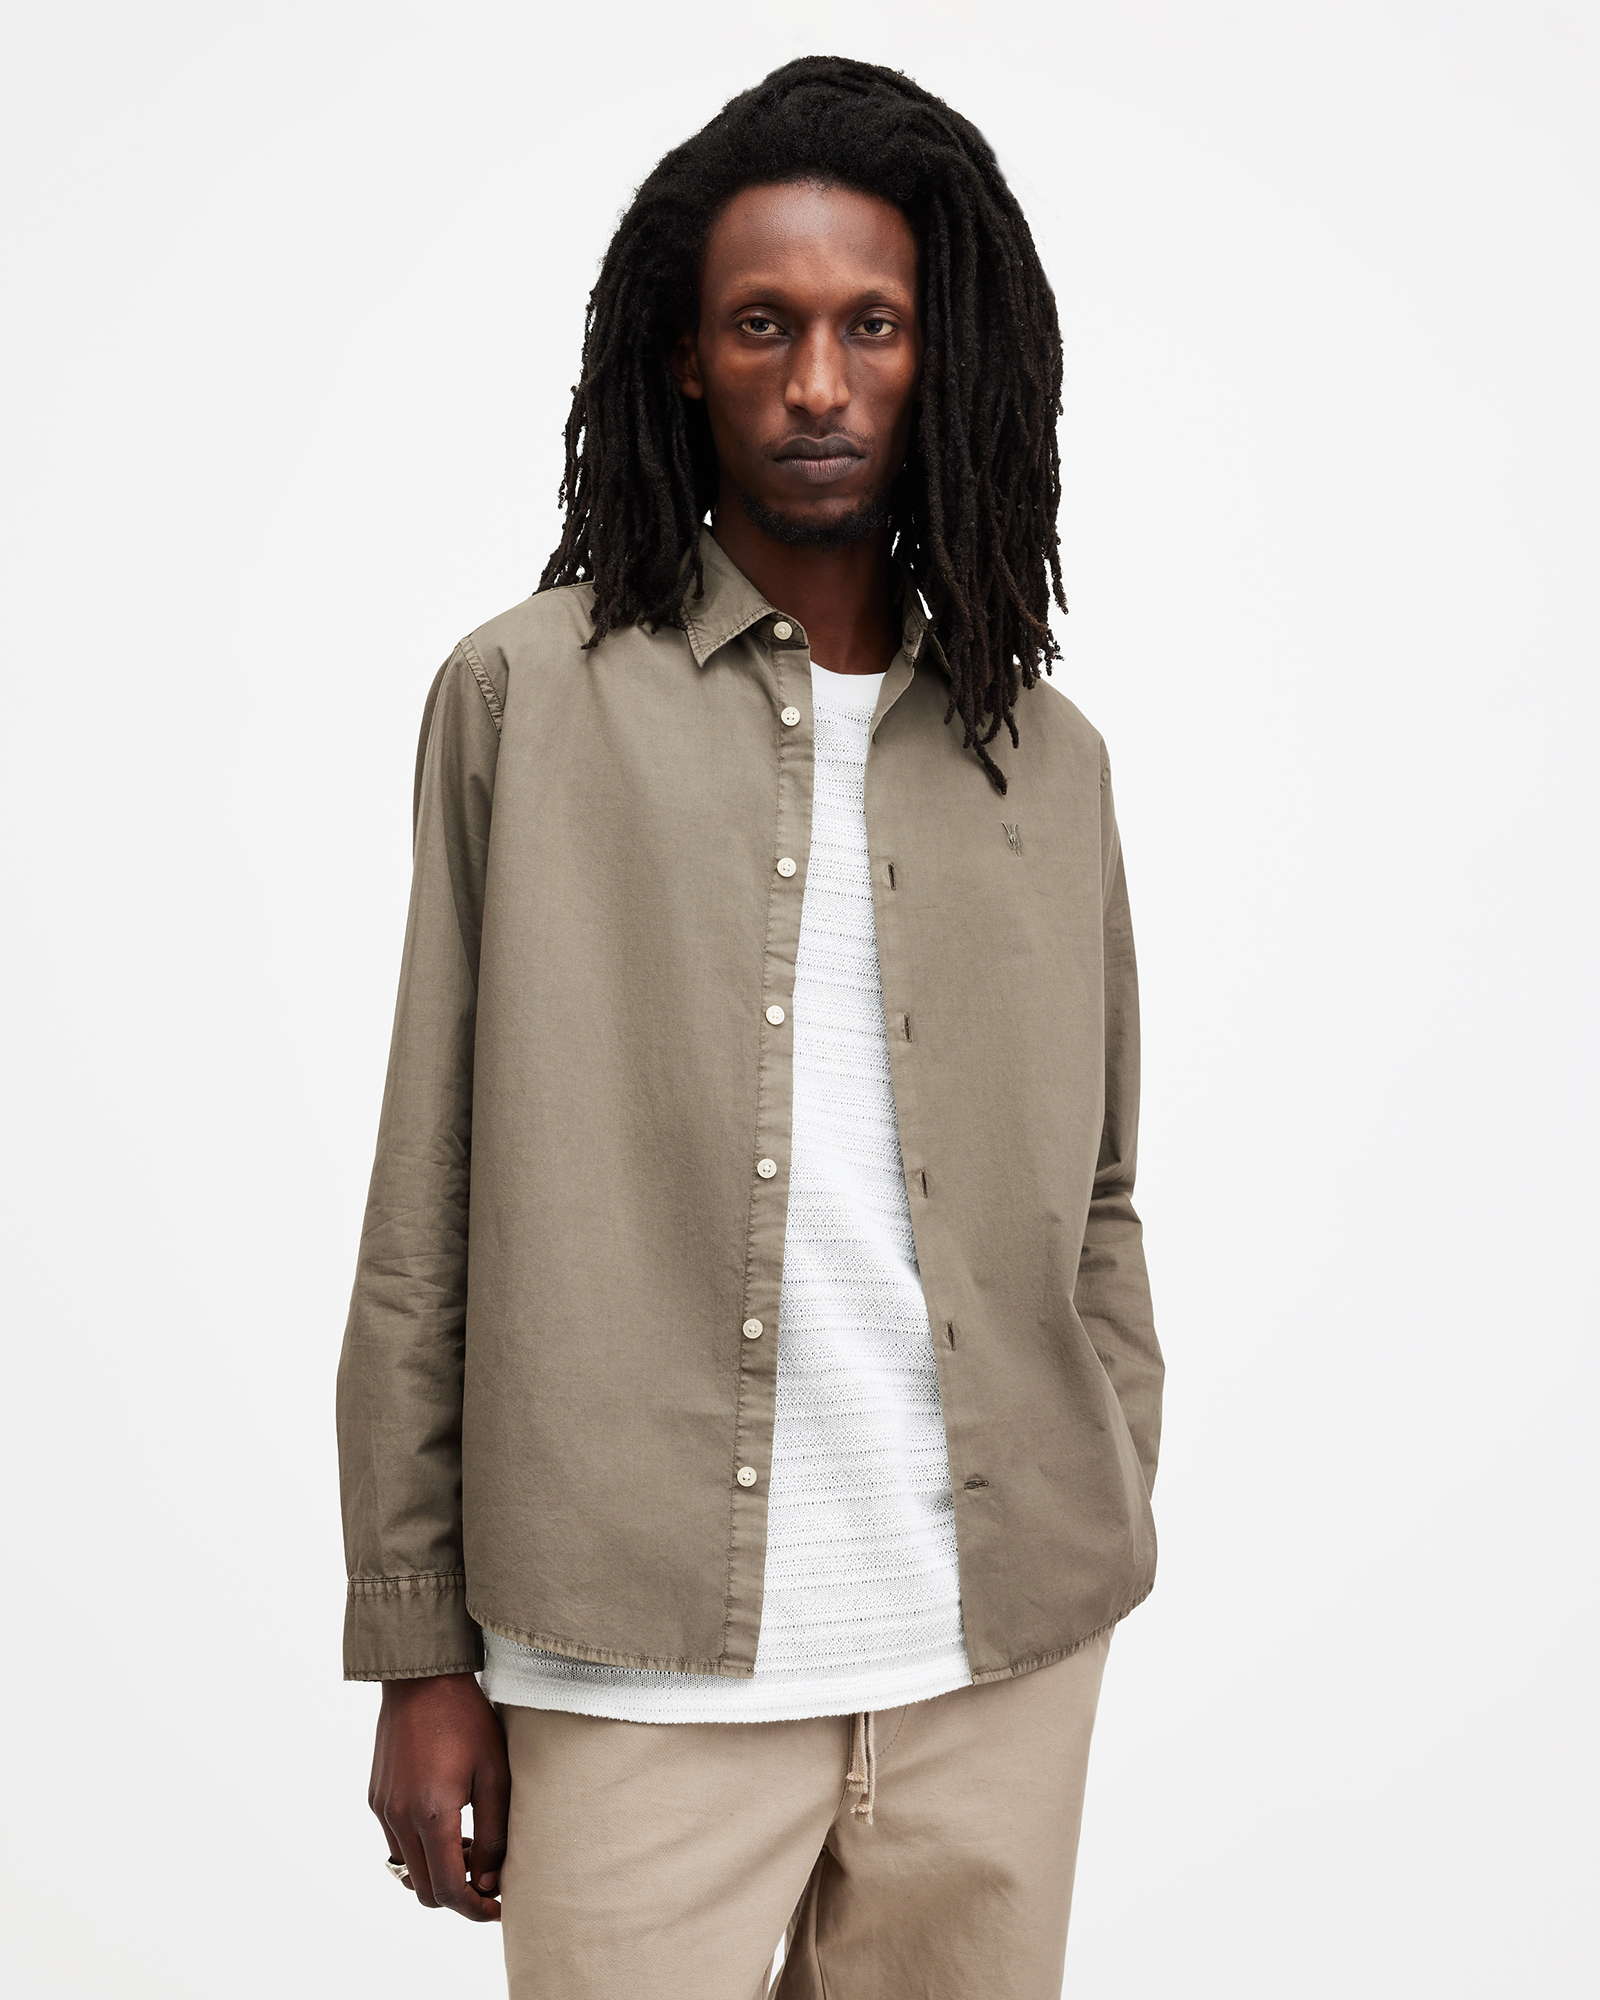 AllSaints Tahoe Garment Dyed Relaxed Fit Shirt